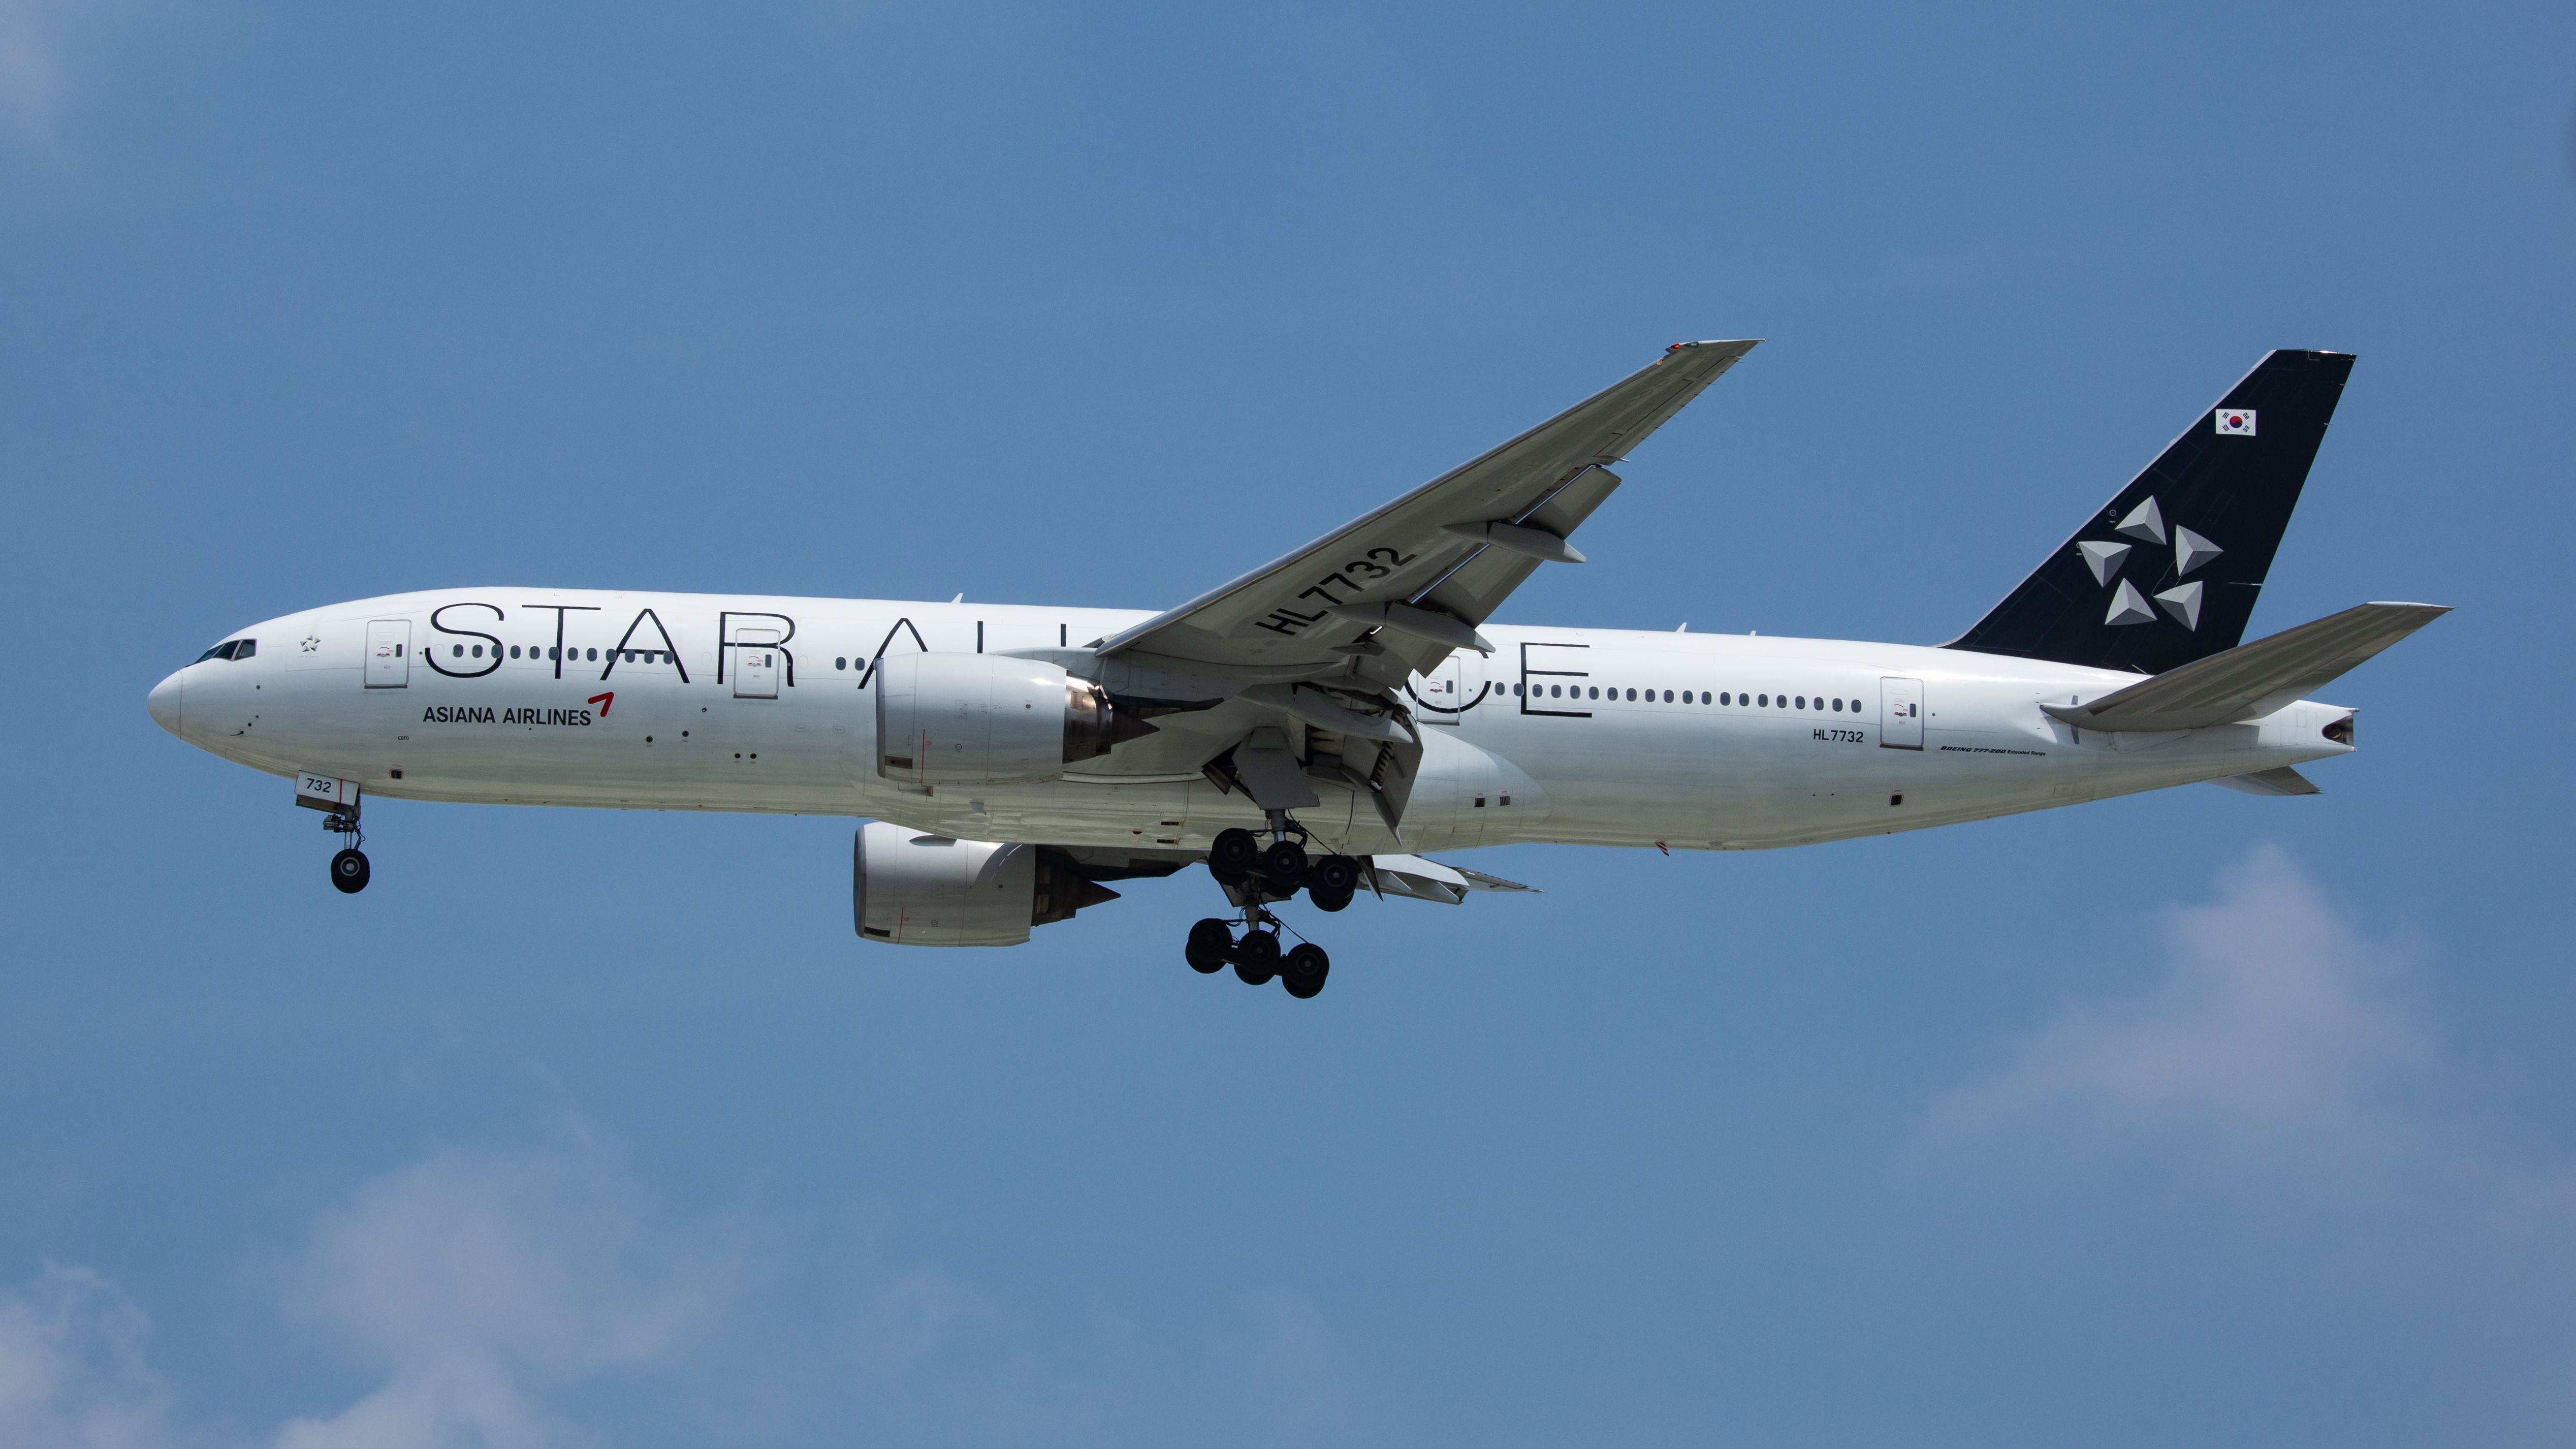 An Asiana Airlines Boeing 777 with a Star Alliance livery 